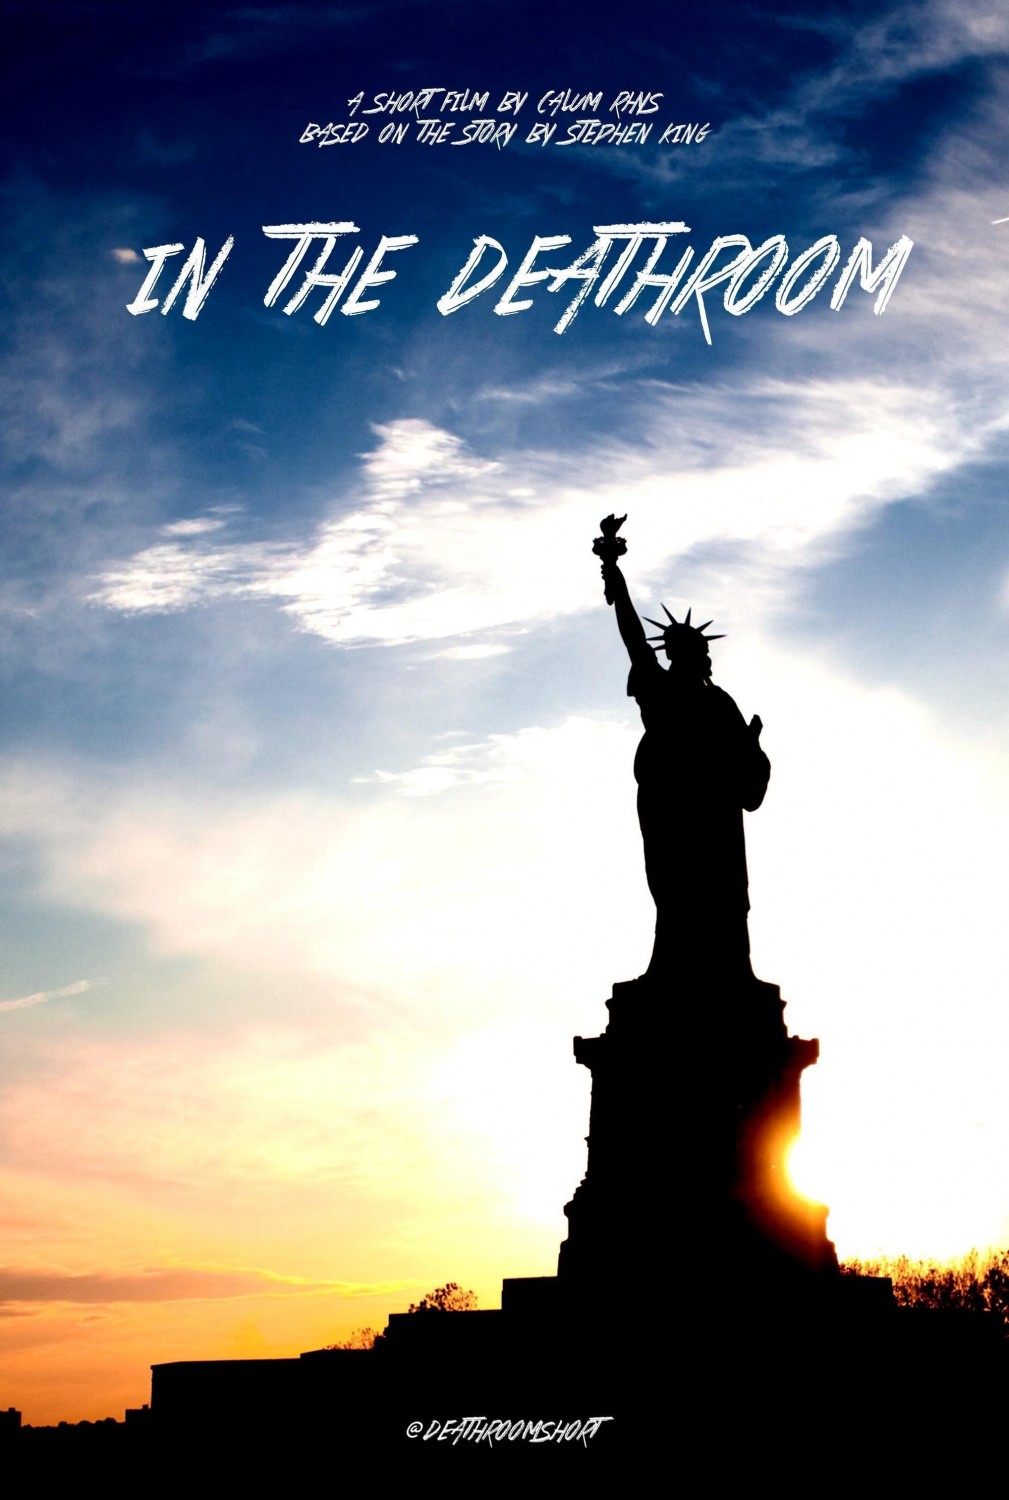 Extra Large Movie Poster Image for In the Deathroom